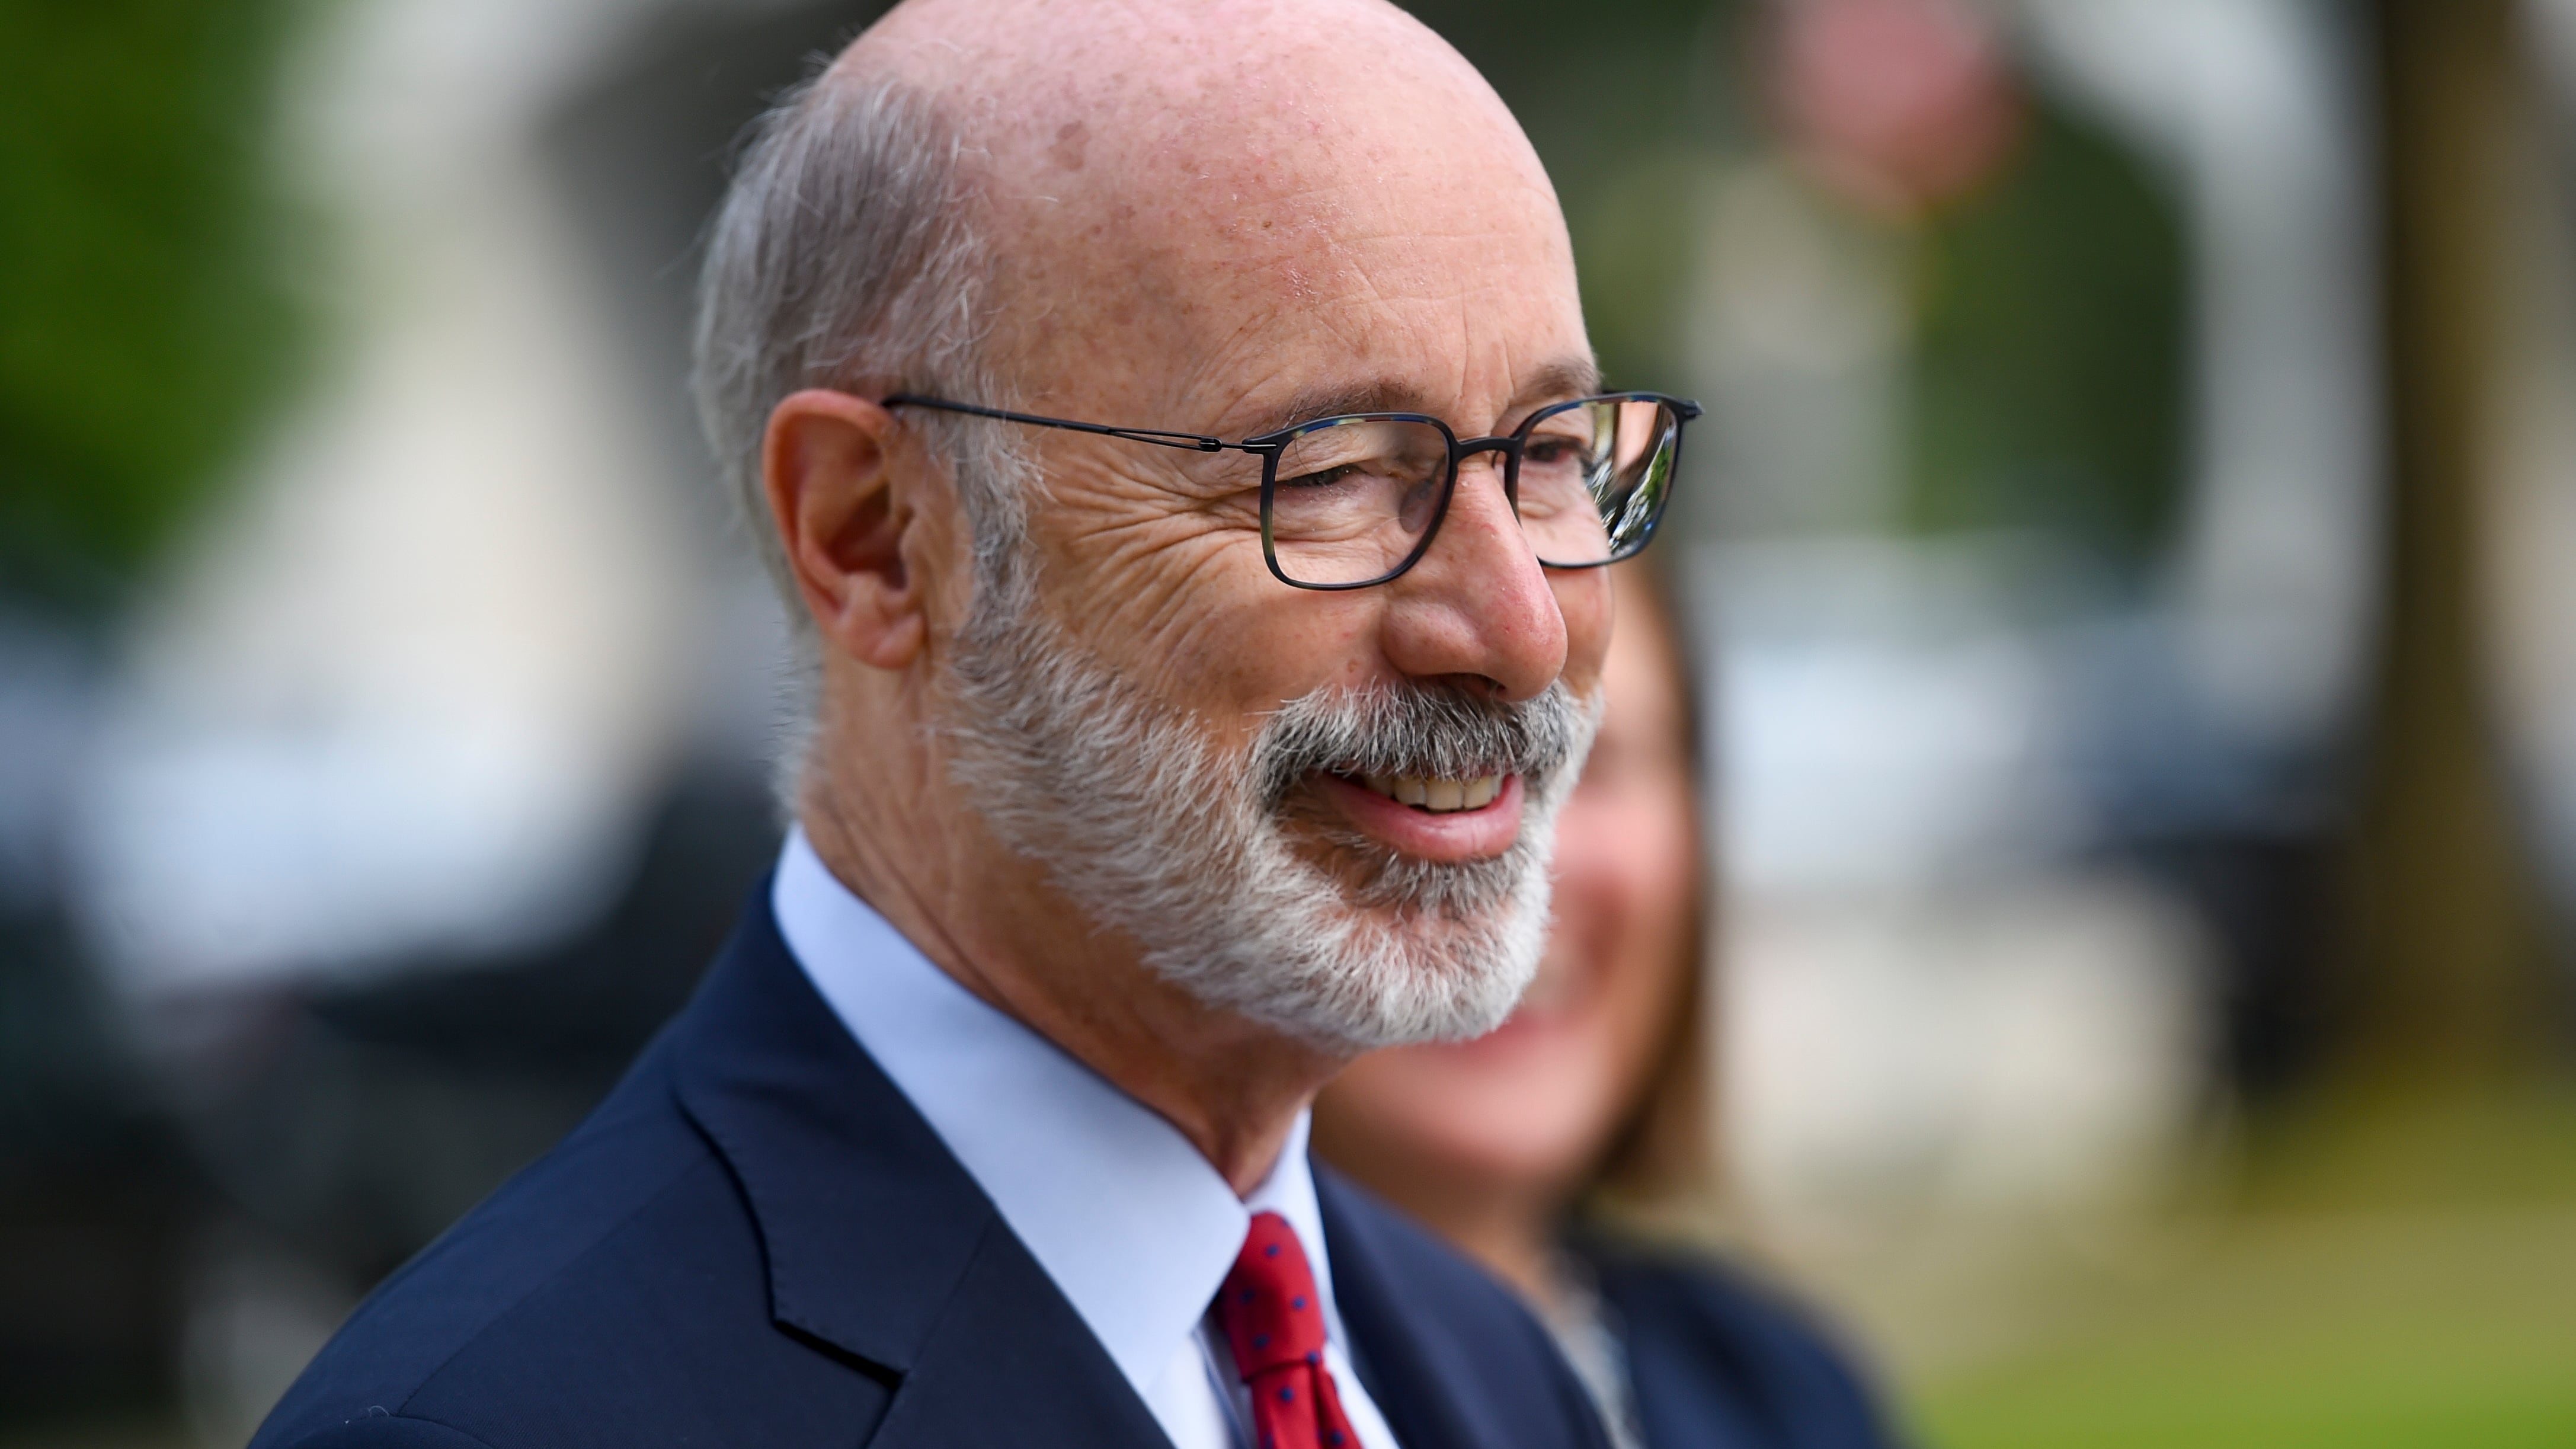 Closeup of Tom Wolf in profile, smiling and listening at an outdoor event, wearing a blue suit and red tie